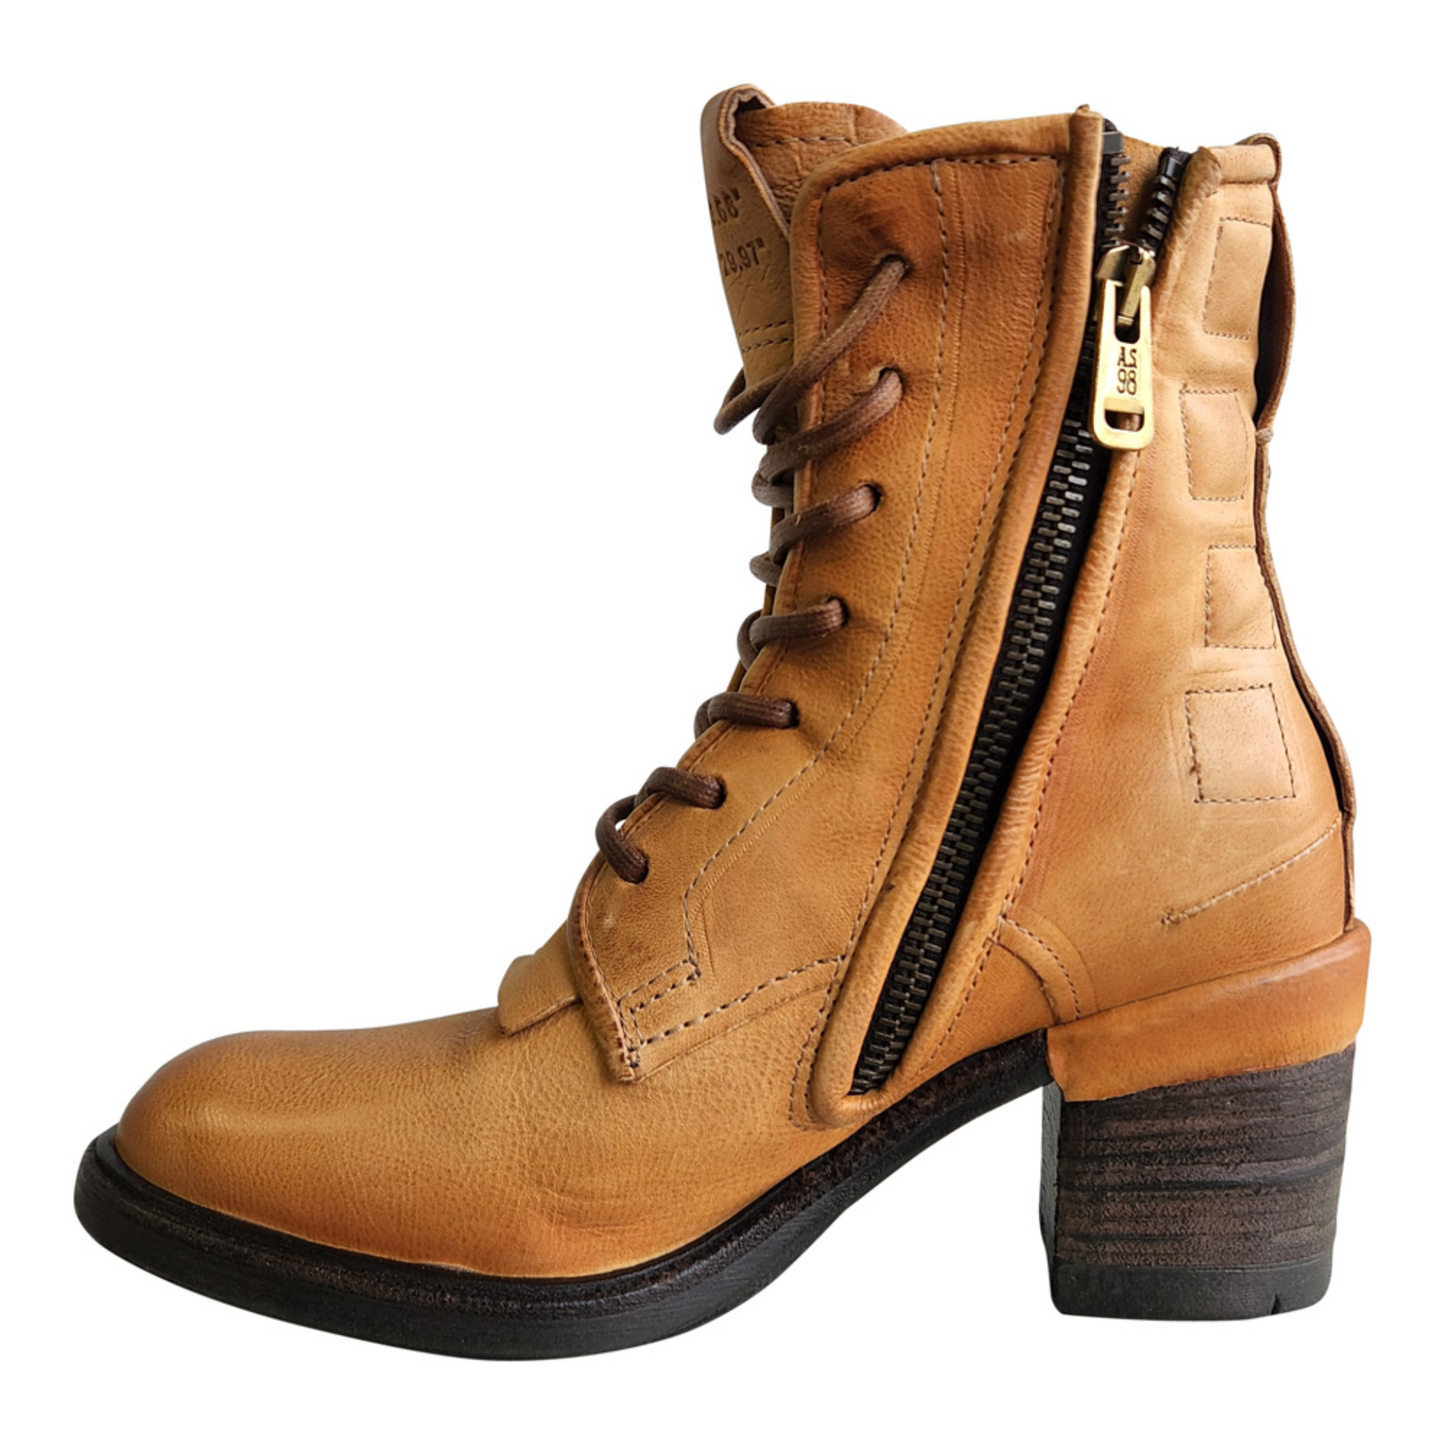 Left side profile of the A.S. 98 Florence Boot in the colour Nacho.